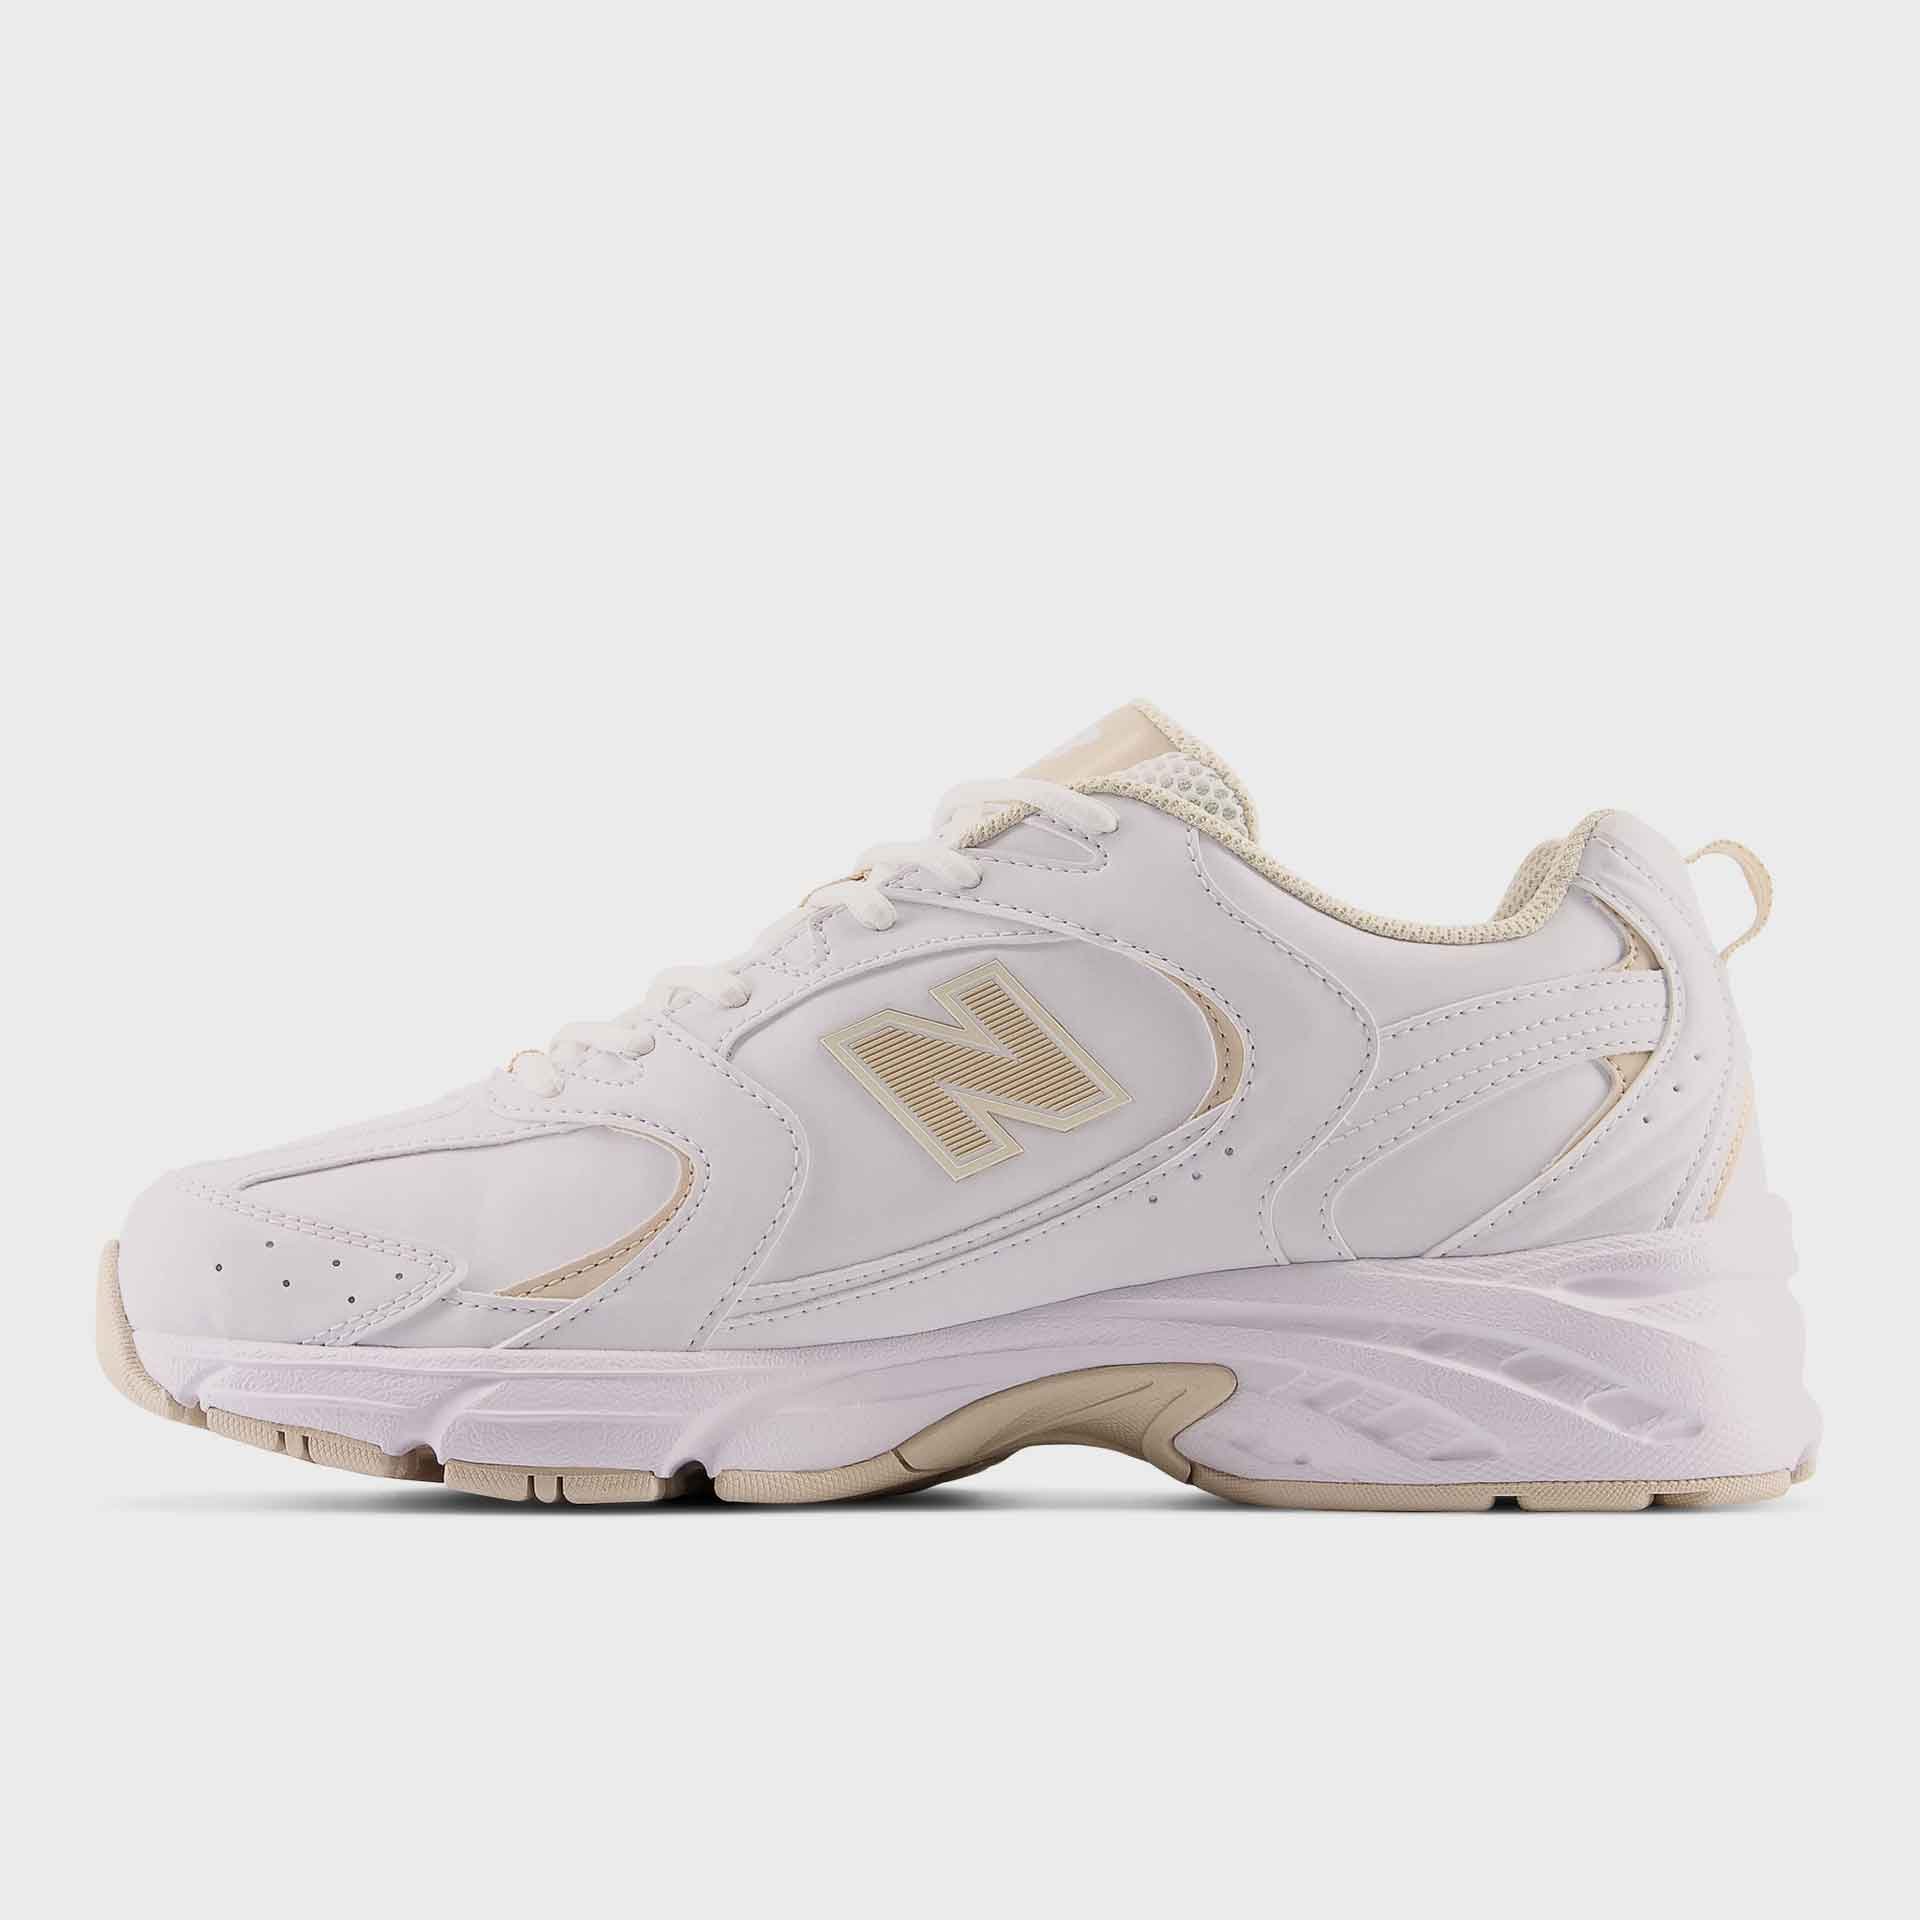 New Balance MR530SYA Sneakers White/Calm Taupe